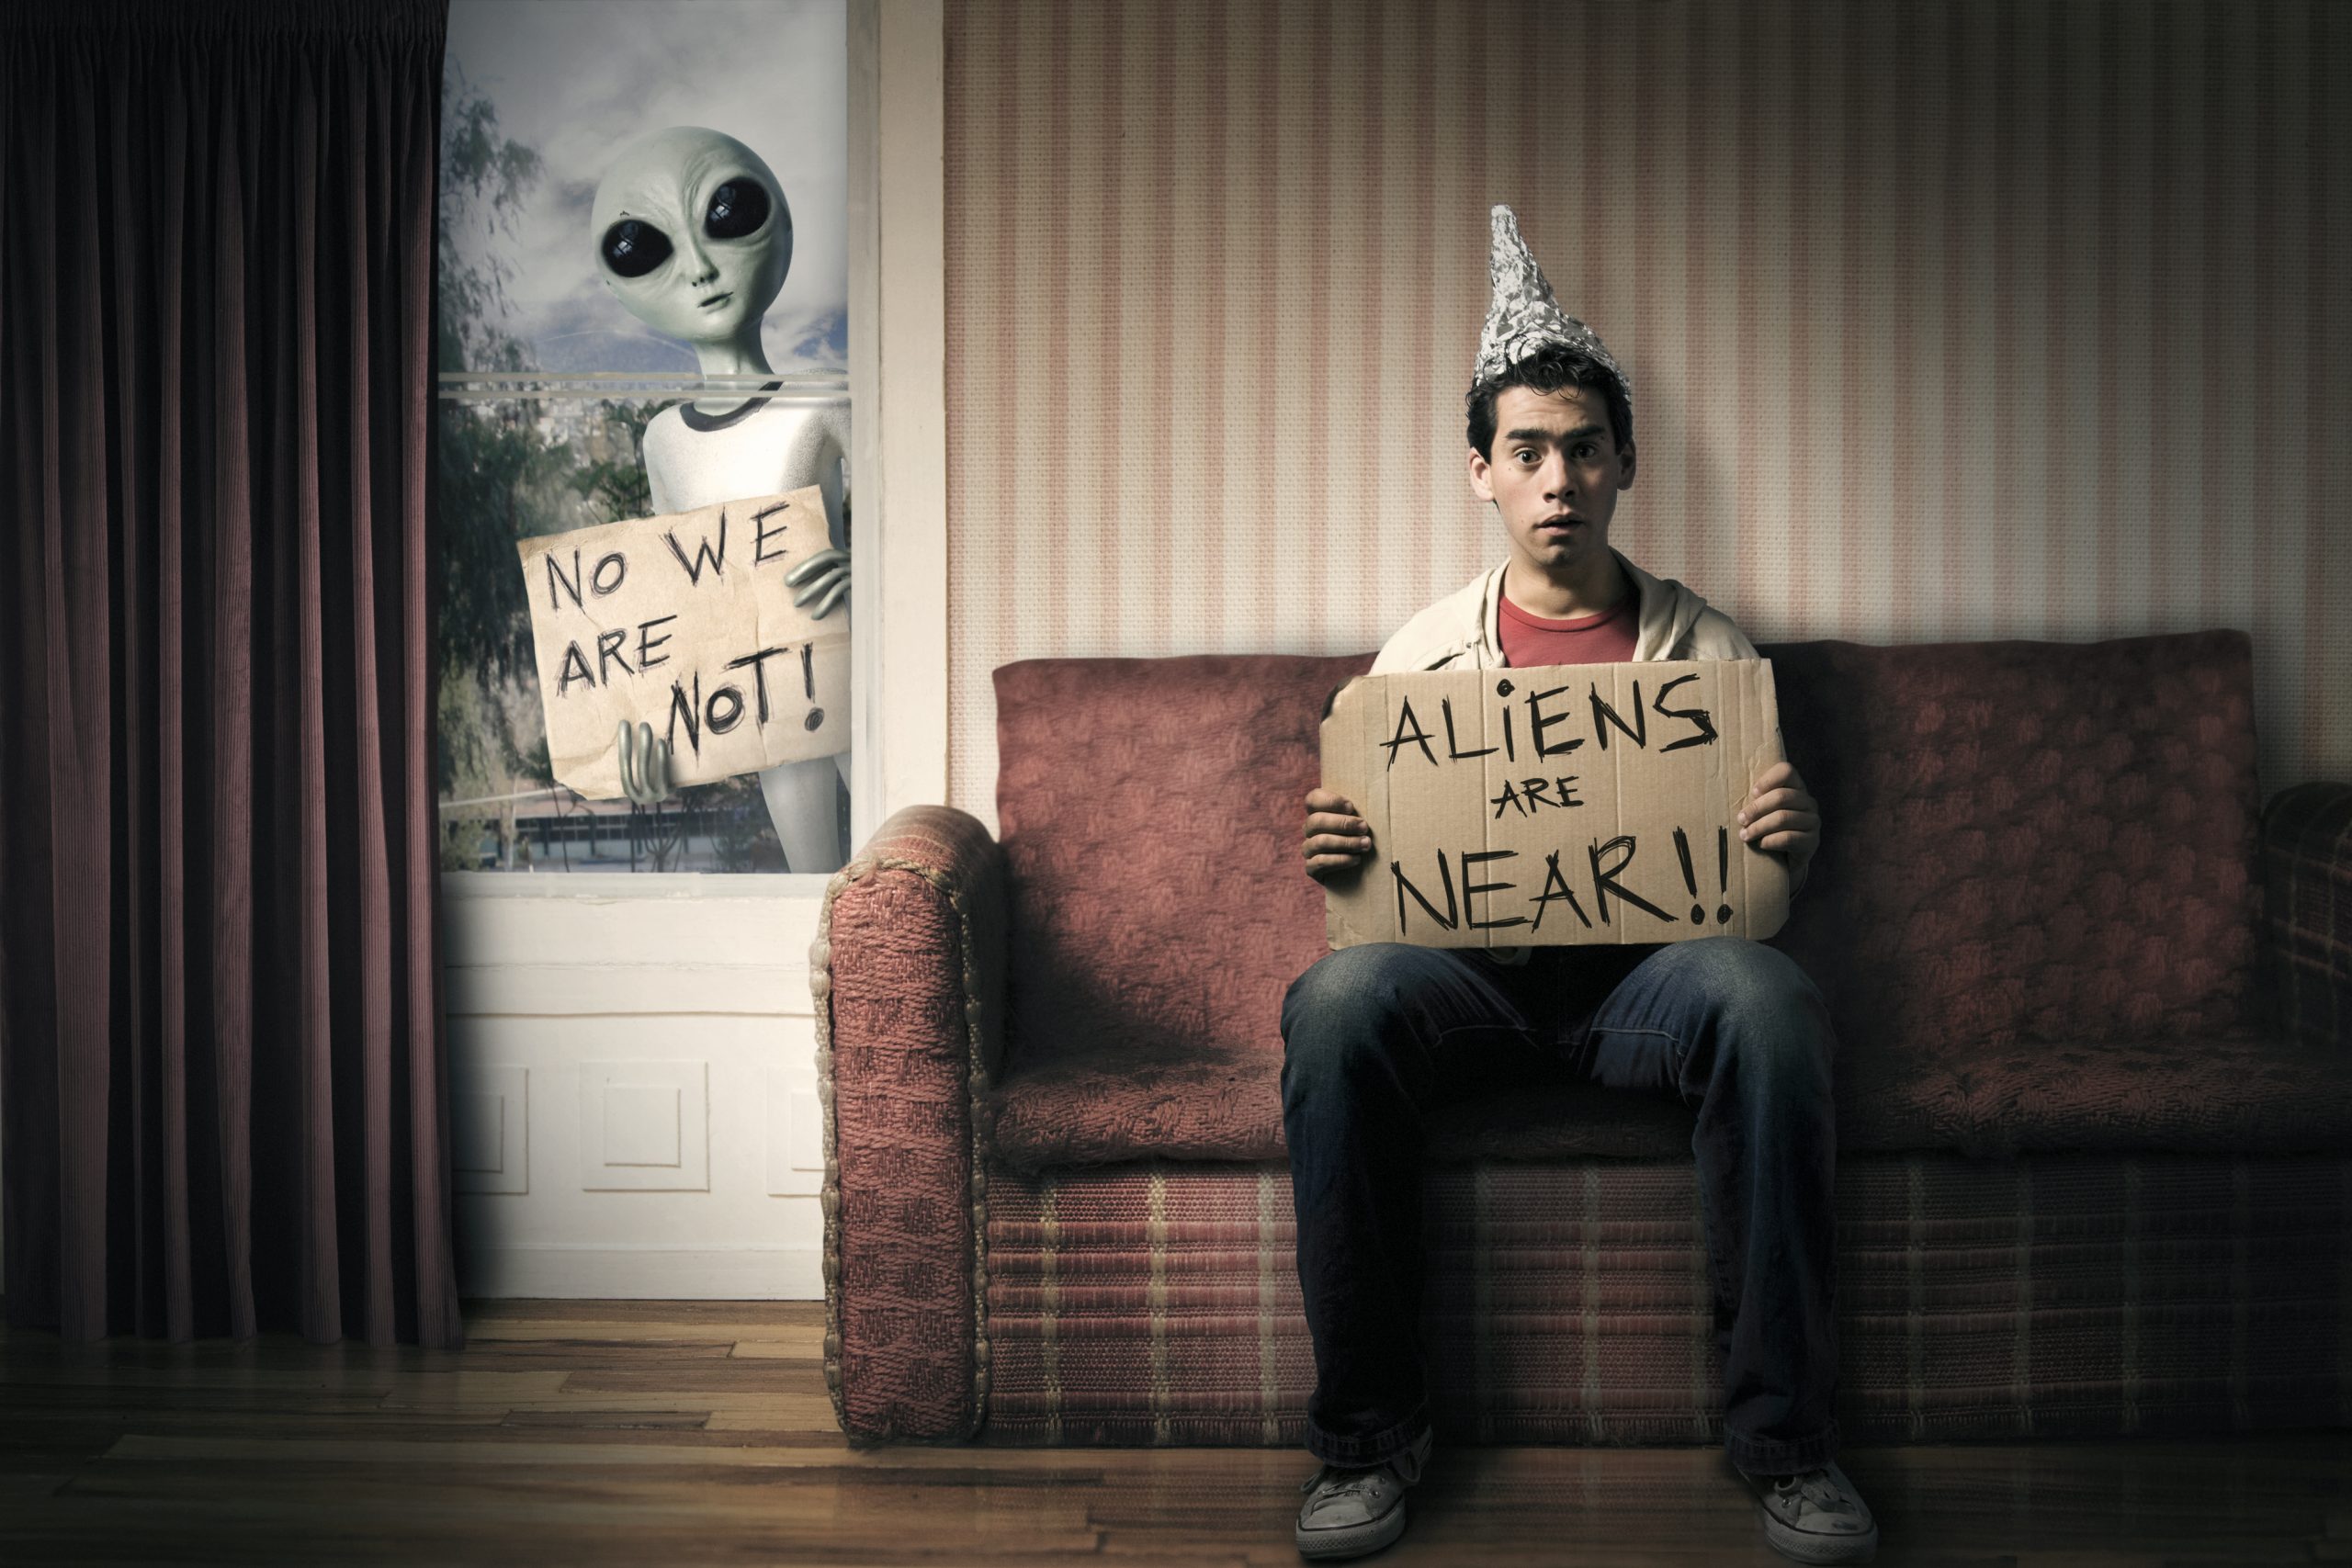 Guy holding a cardboard saying aliens are near.